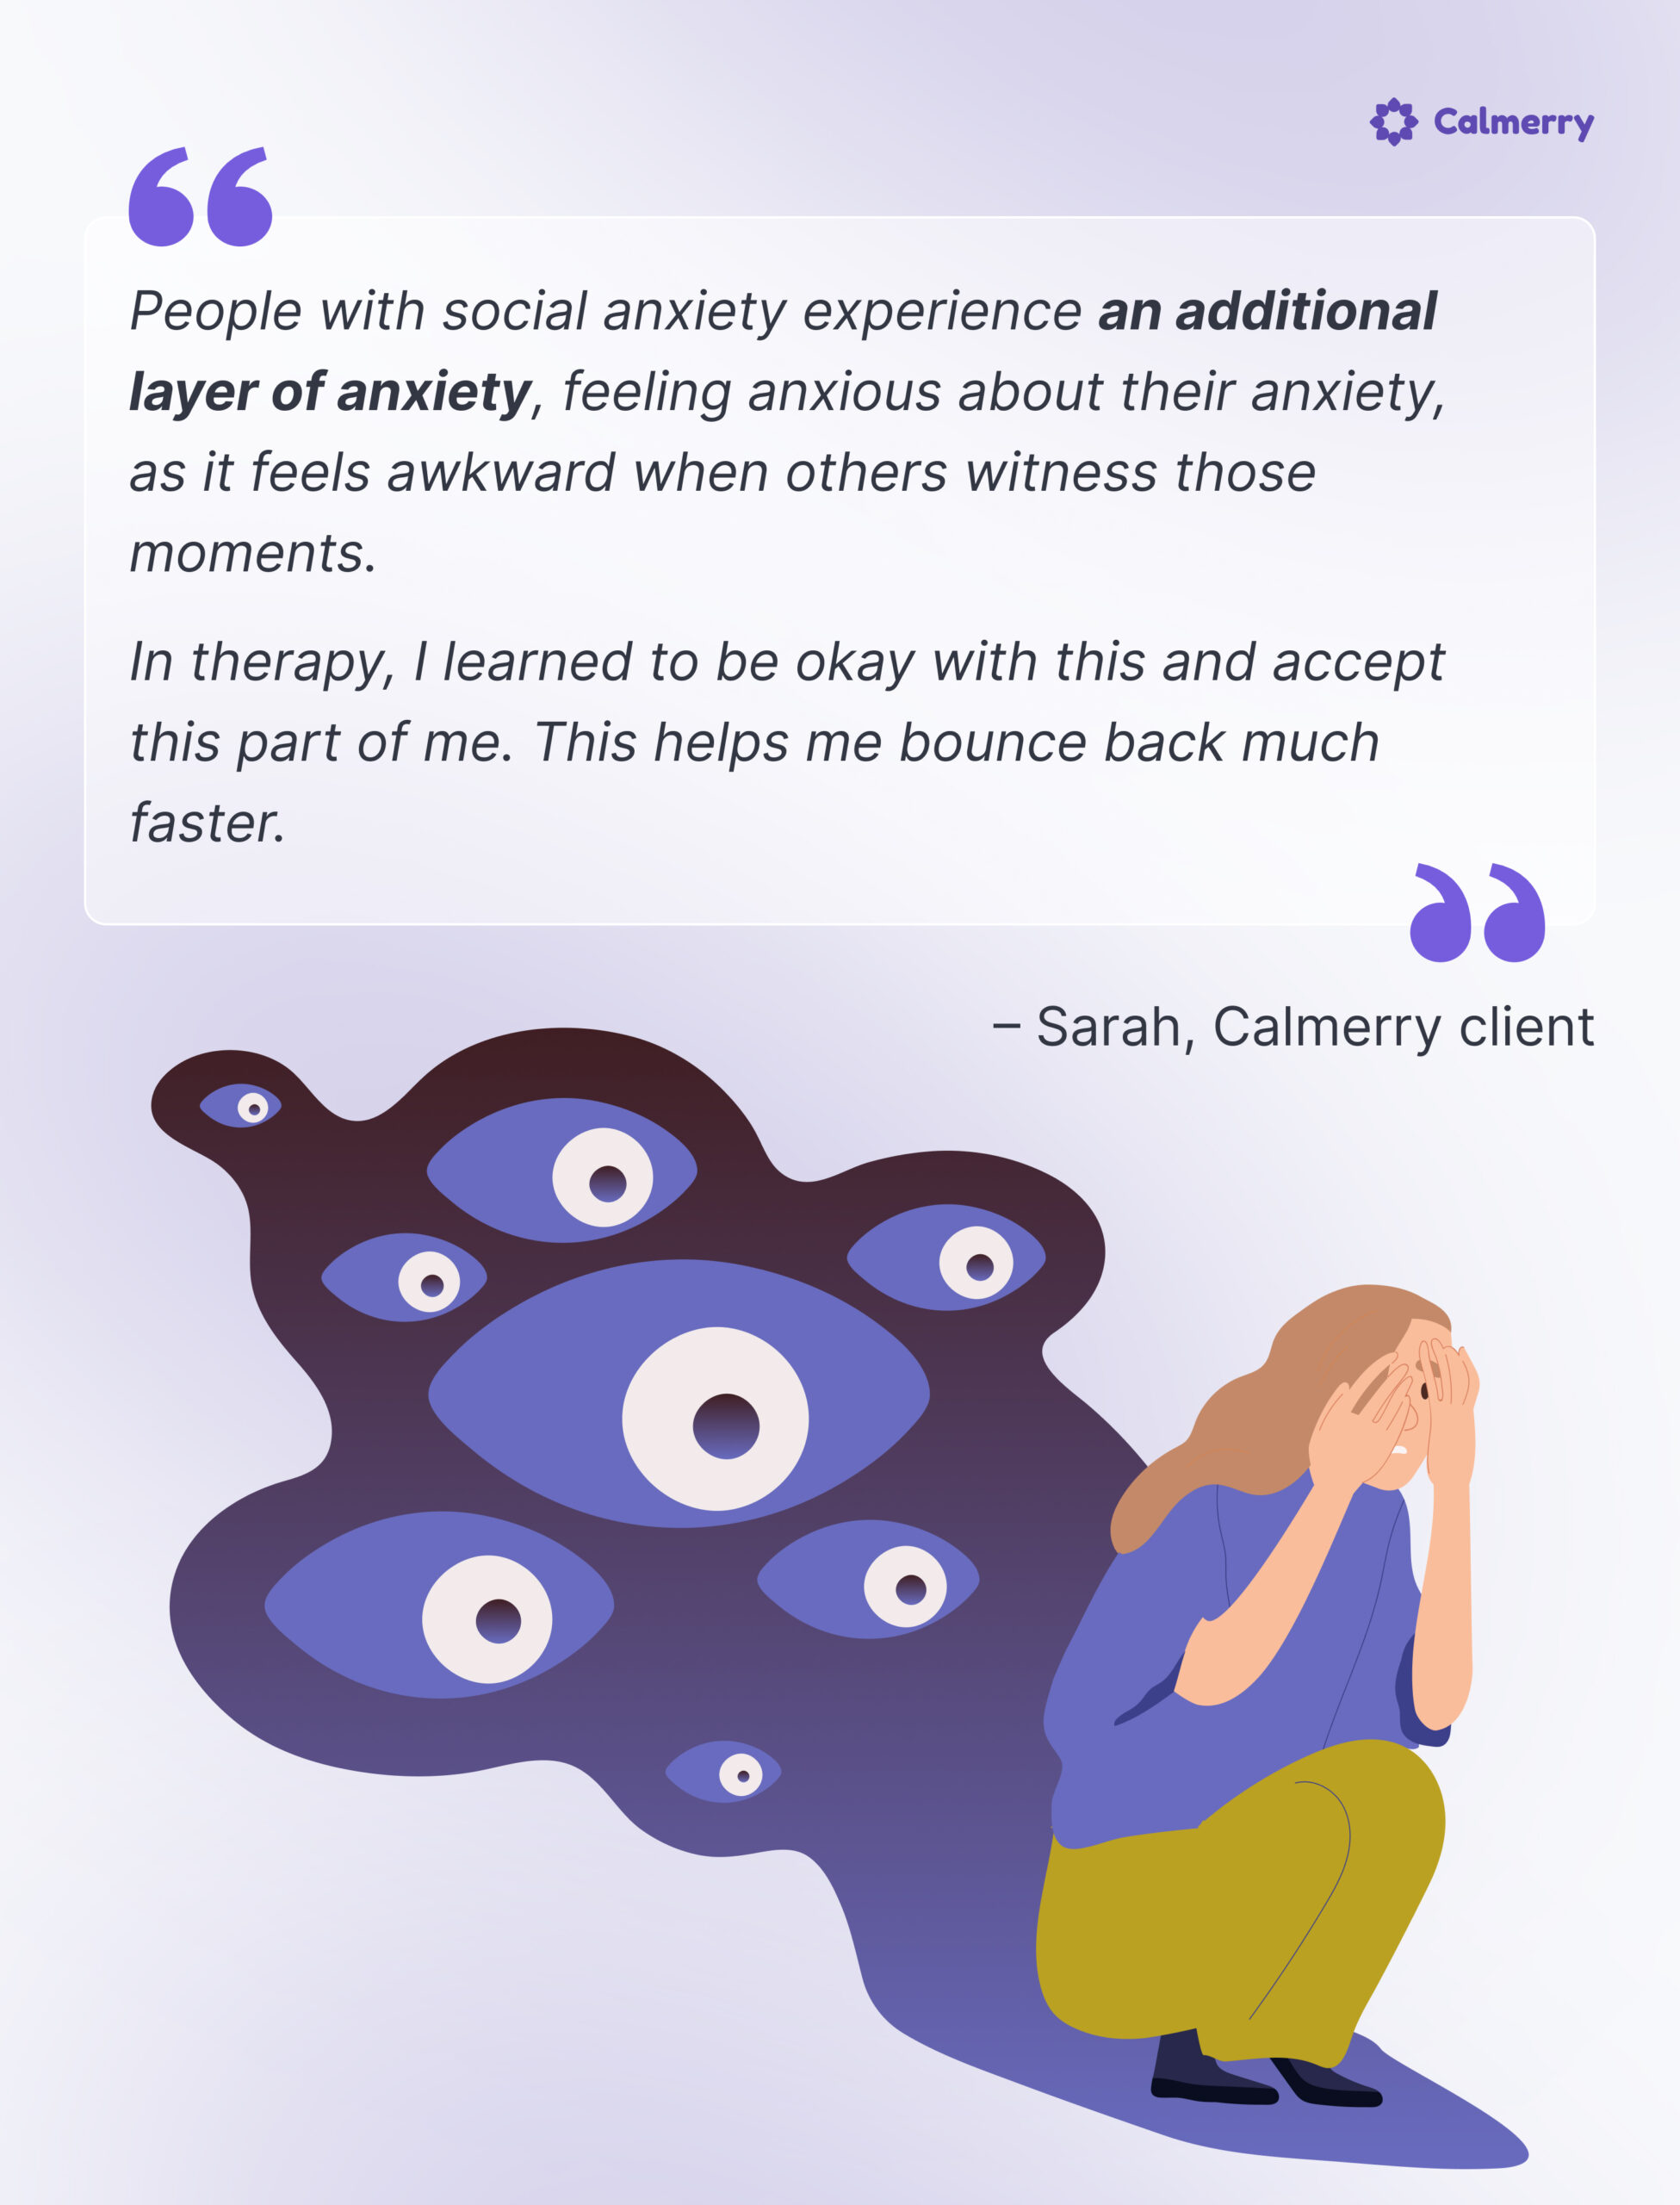 A graphic illustration from Calmerry visualizing the internal experience of social anxiety. A woman is seated, covering her face with her hands, with an overwhelming shadow cast behind her filled with eyes representing the scrutiny felt by those with social anxiety. Accompanying text from 'Sarah, a Calmerry client', describes the layered nature of social anxiety and the resilience gained through therapy, set against a soothing purple background